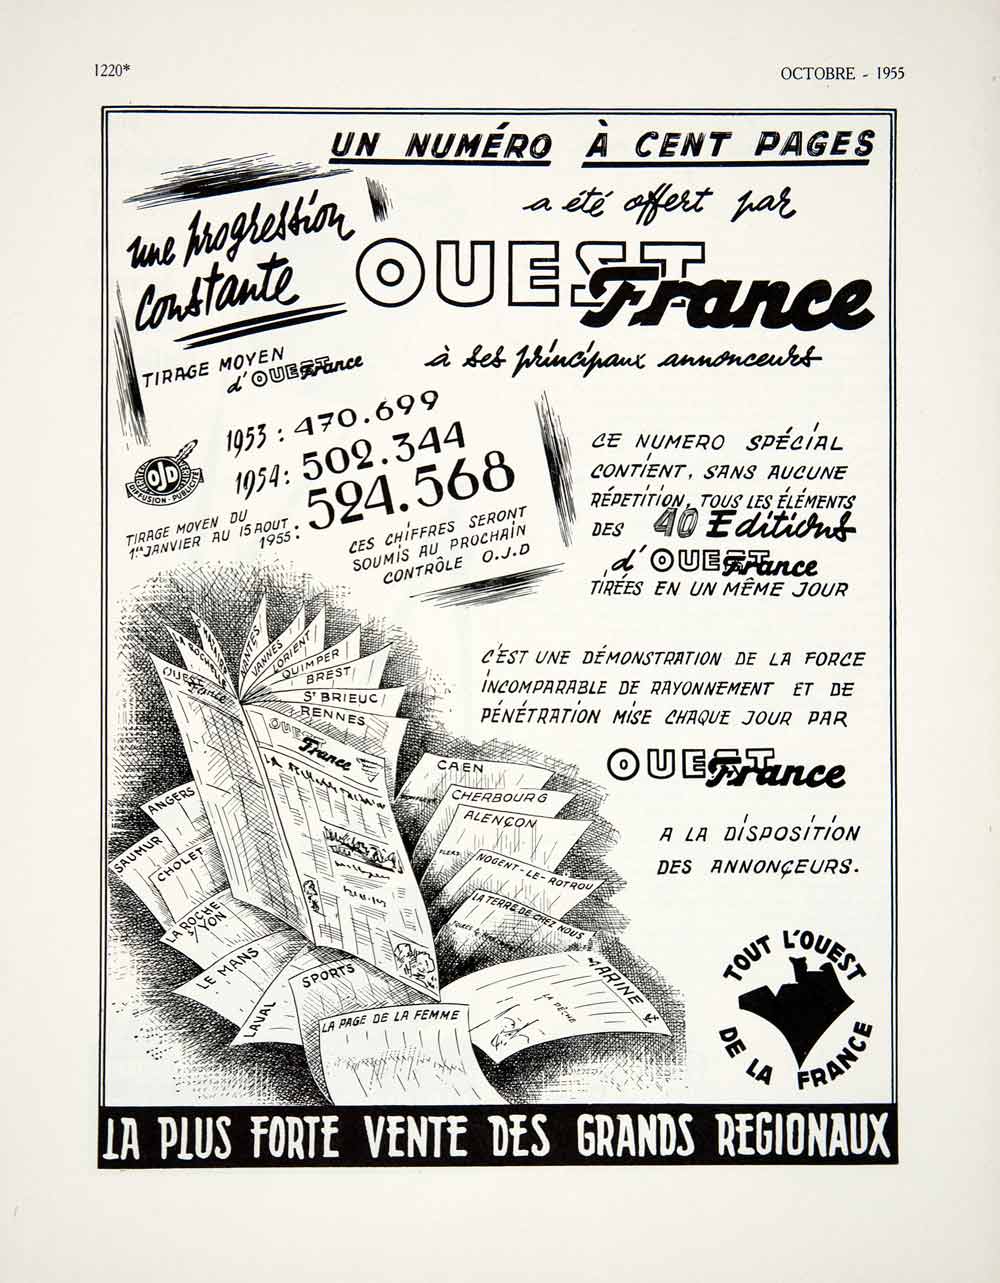 1955 Ad Ouest France Newspaper Paper French Advertising Cherbourg Caen VEN2